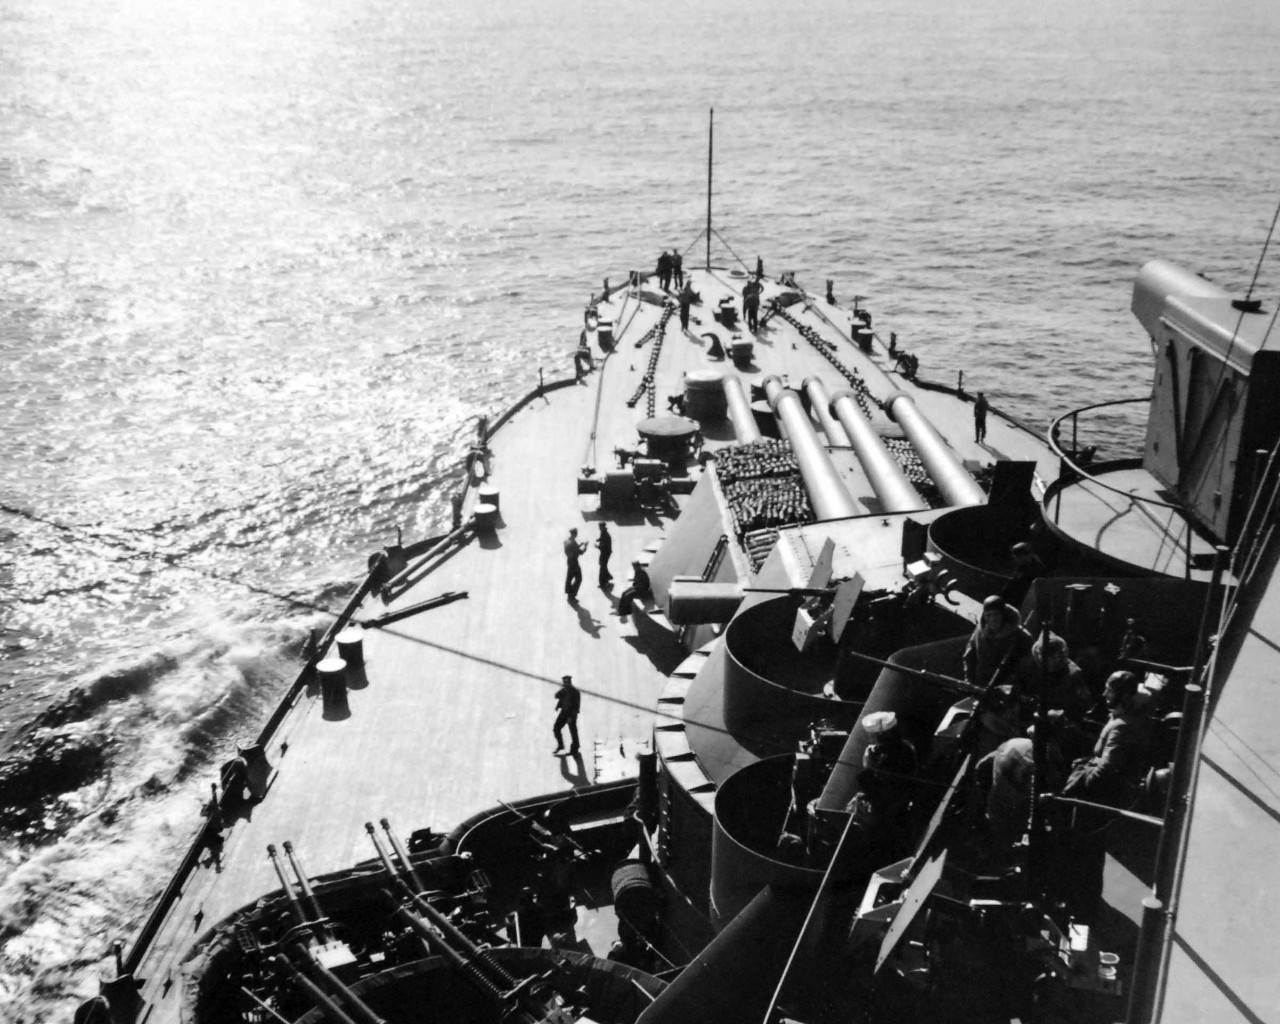 80-G-57049:  Aleutian Island Campaign, June 1942-August 1943.  Battle of Attu, May 11-29, 1943.     USS Pennsylvania (BB 38) just before bombardment of Attu Island, Alaska, May 11, 1943.    U.S. Navy Photograph, now in the collections of the National Archives.  (2017/05/02).